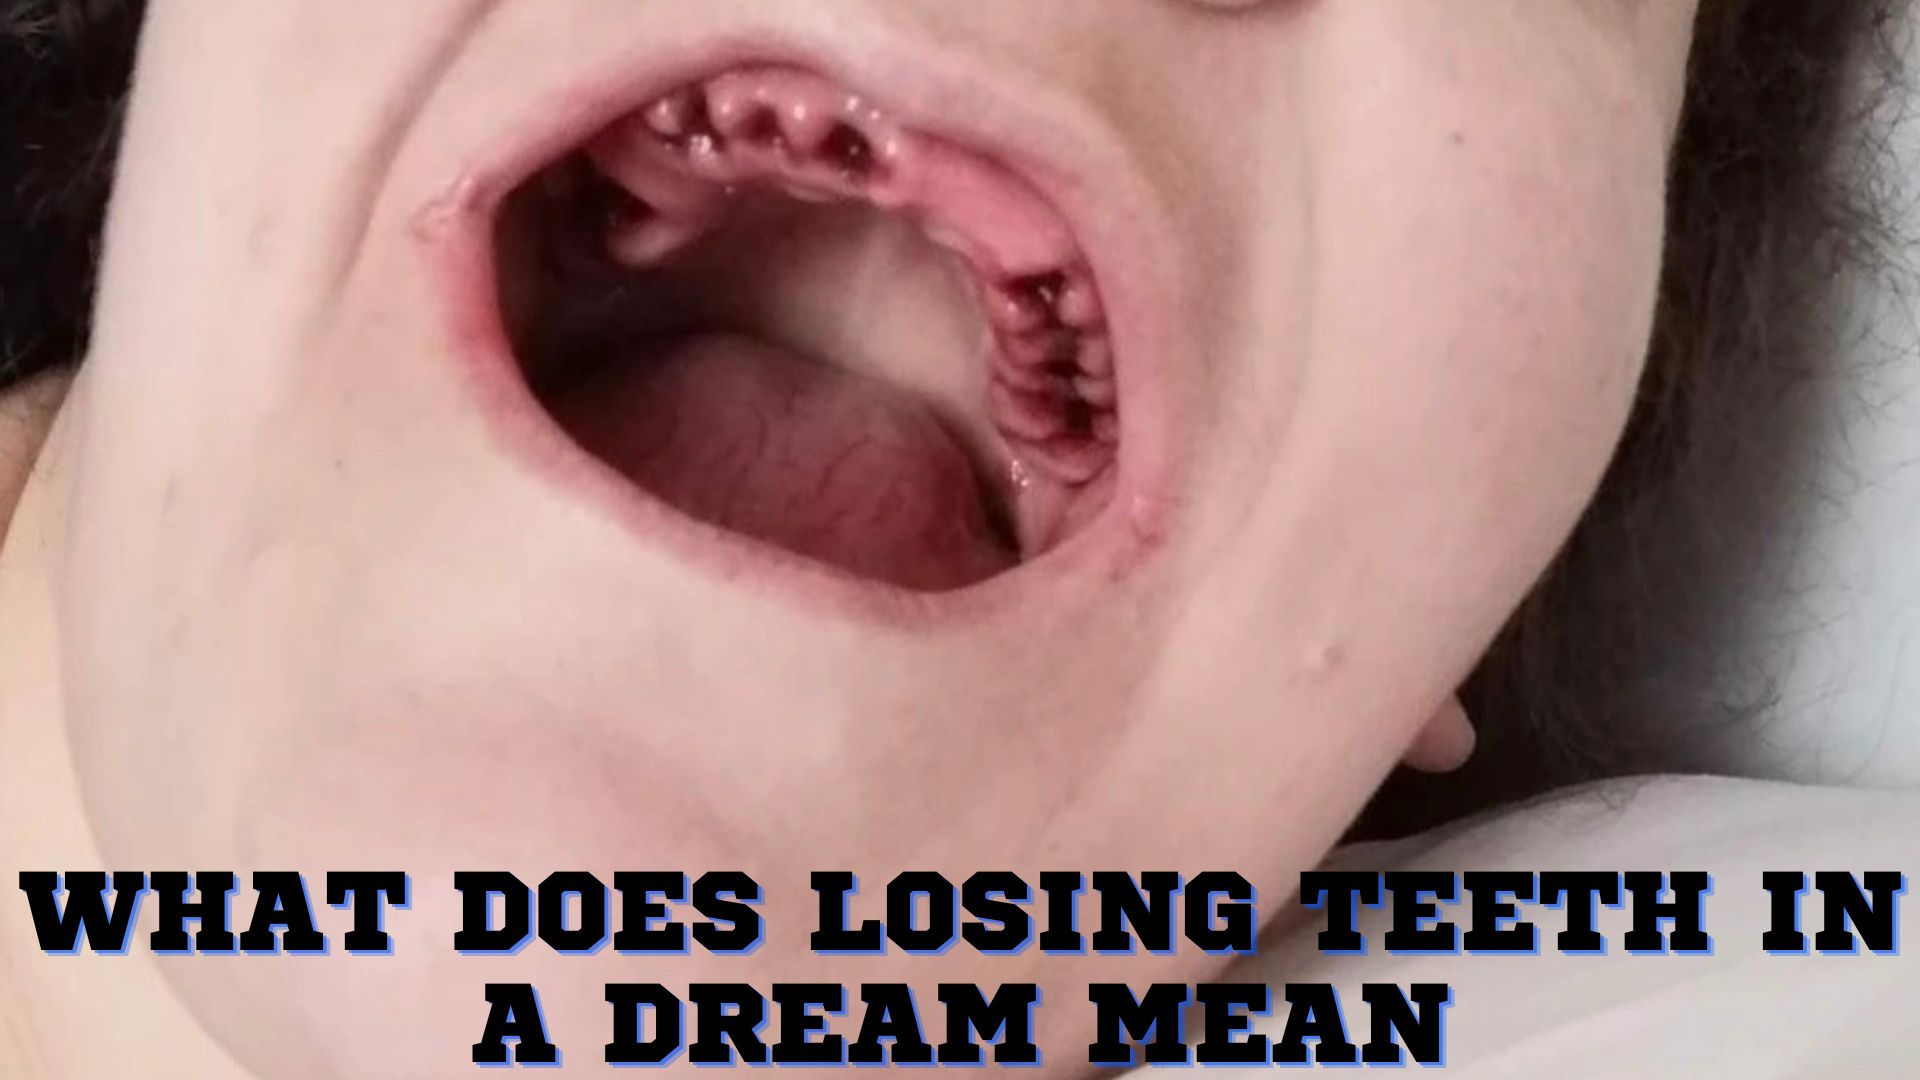 What Does Losing Teeth In A Dream Mean?